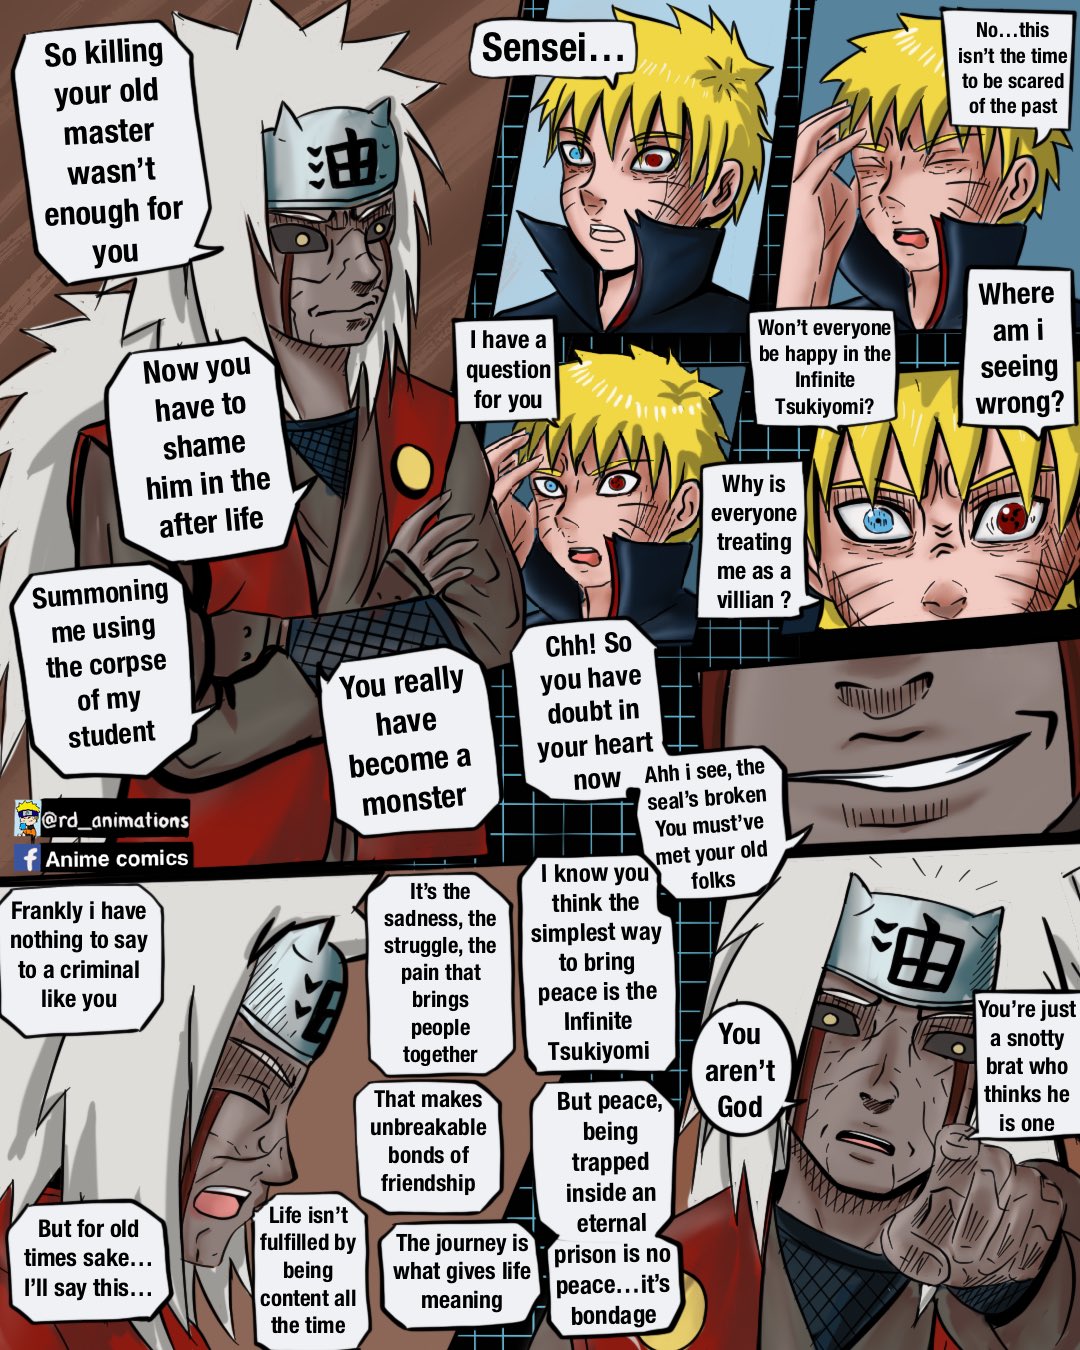 Rd animations on X: Evil naruto part 40 . Would you like to be in an  infinite Tsukiyomi and live a happy life or do u want to struggle……..i  would want the